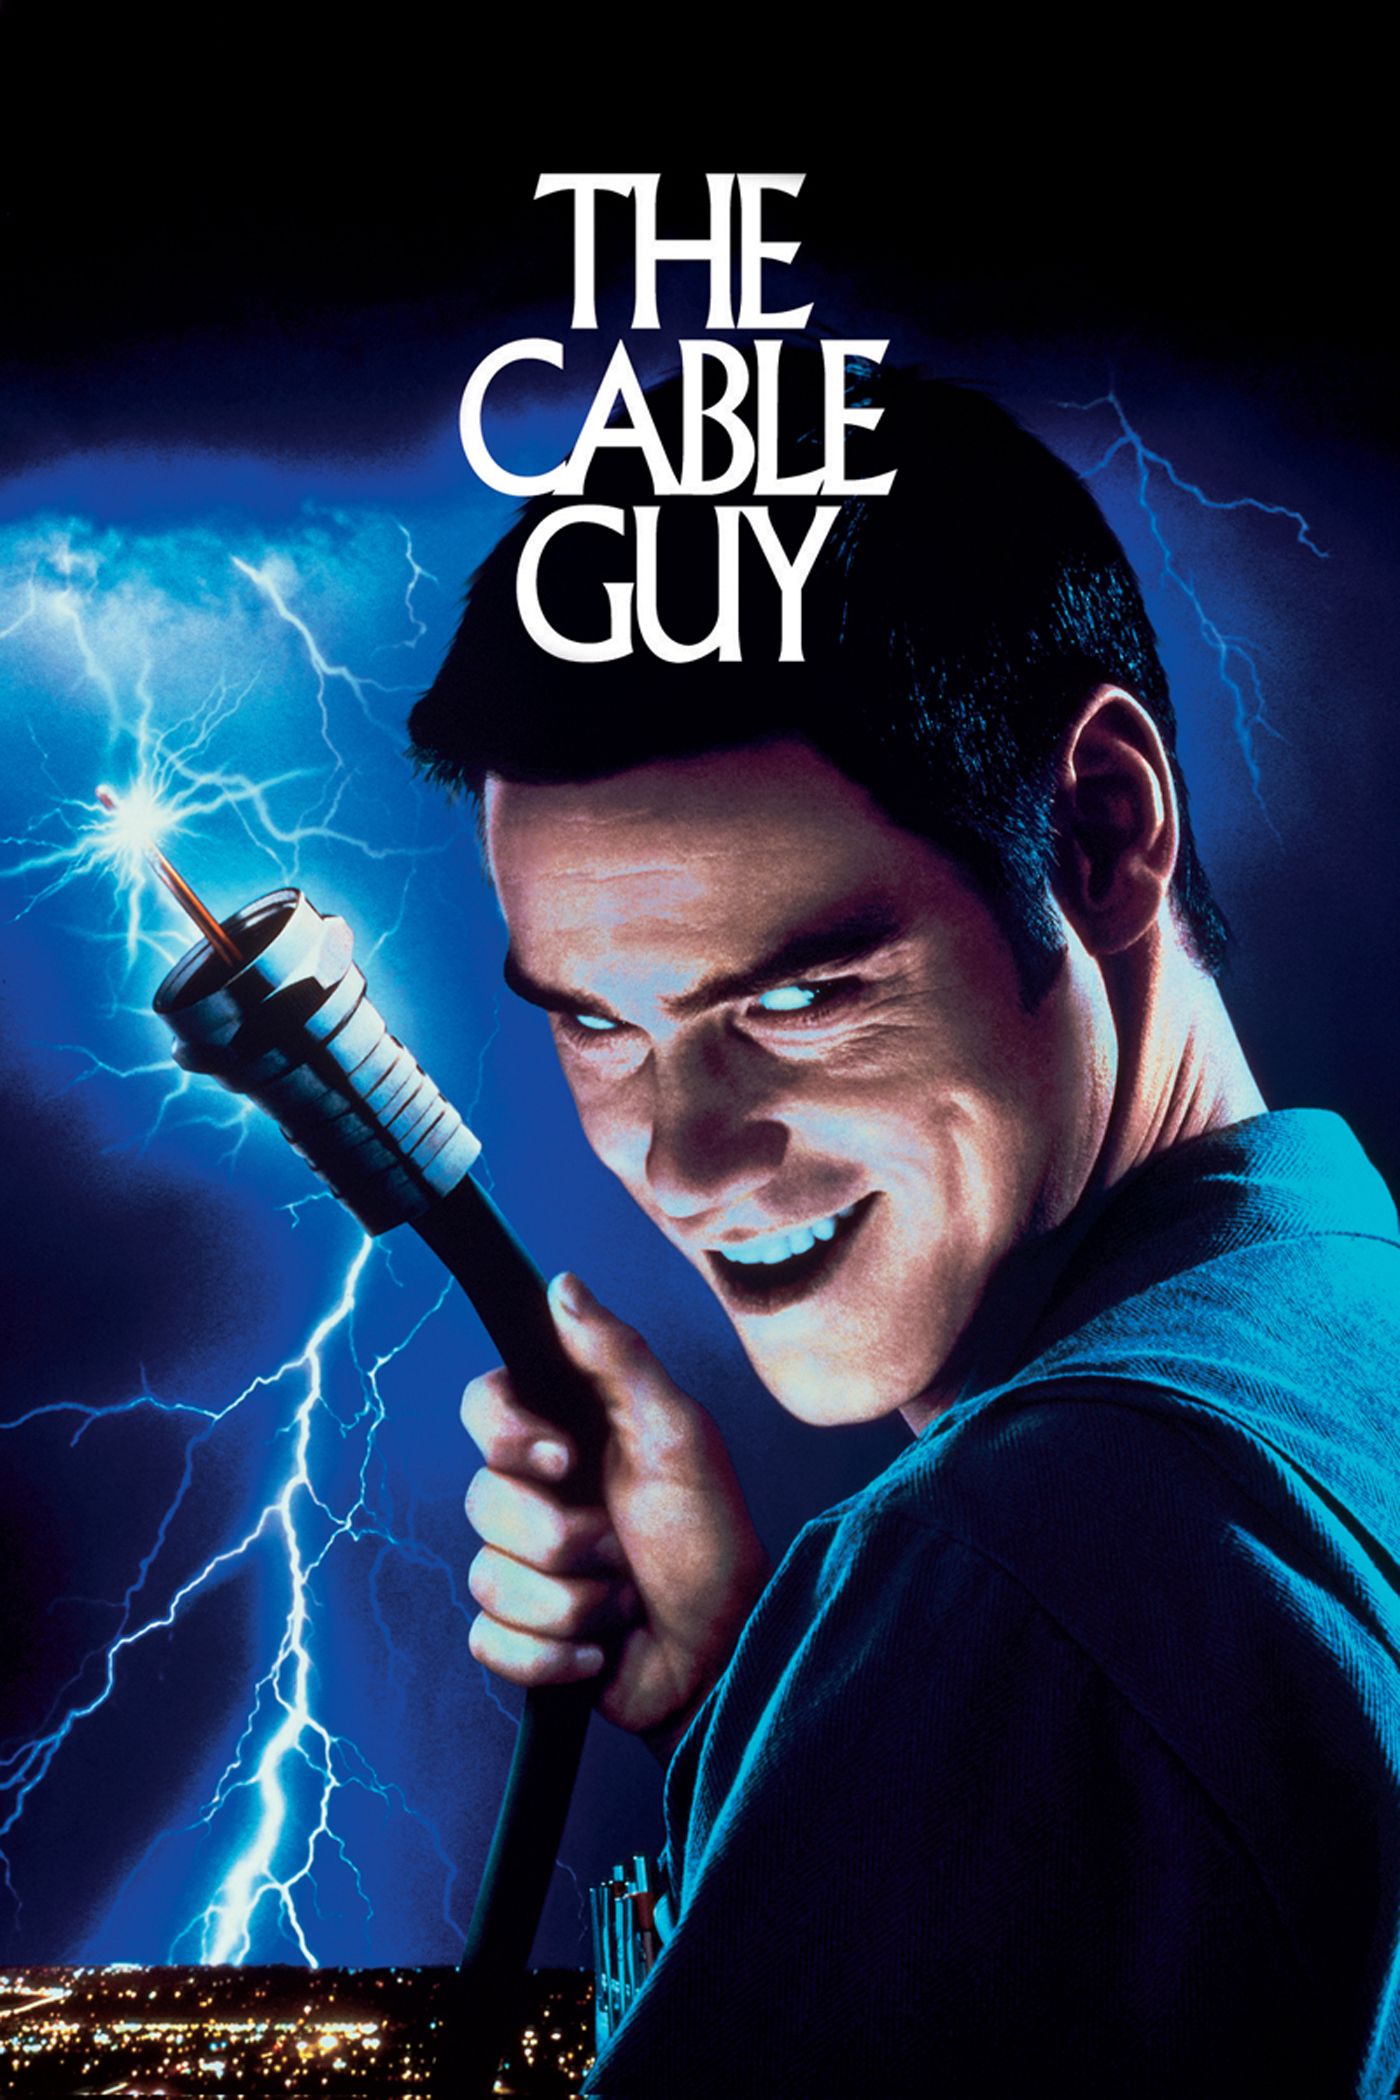 The Cable Guy (1996) with pre-movie trivia hosted by Cinema Recall